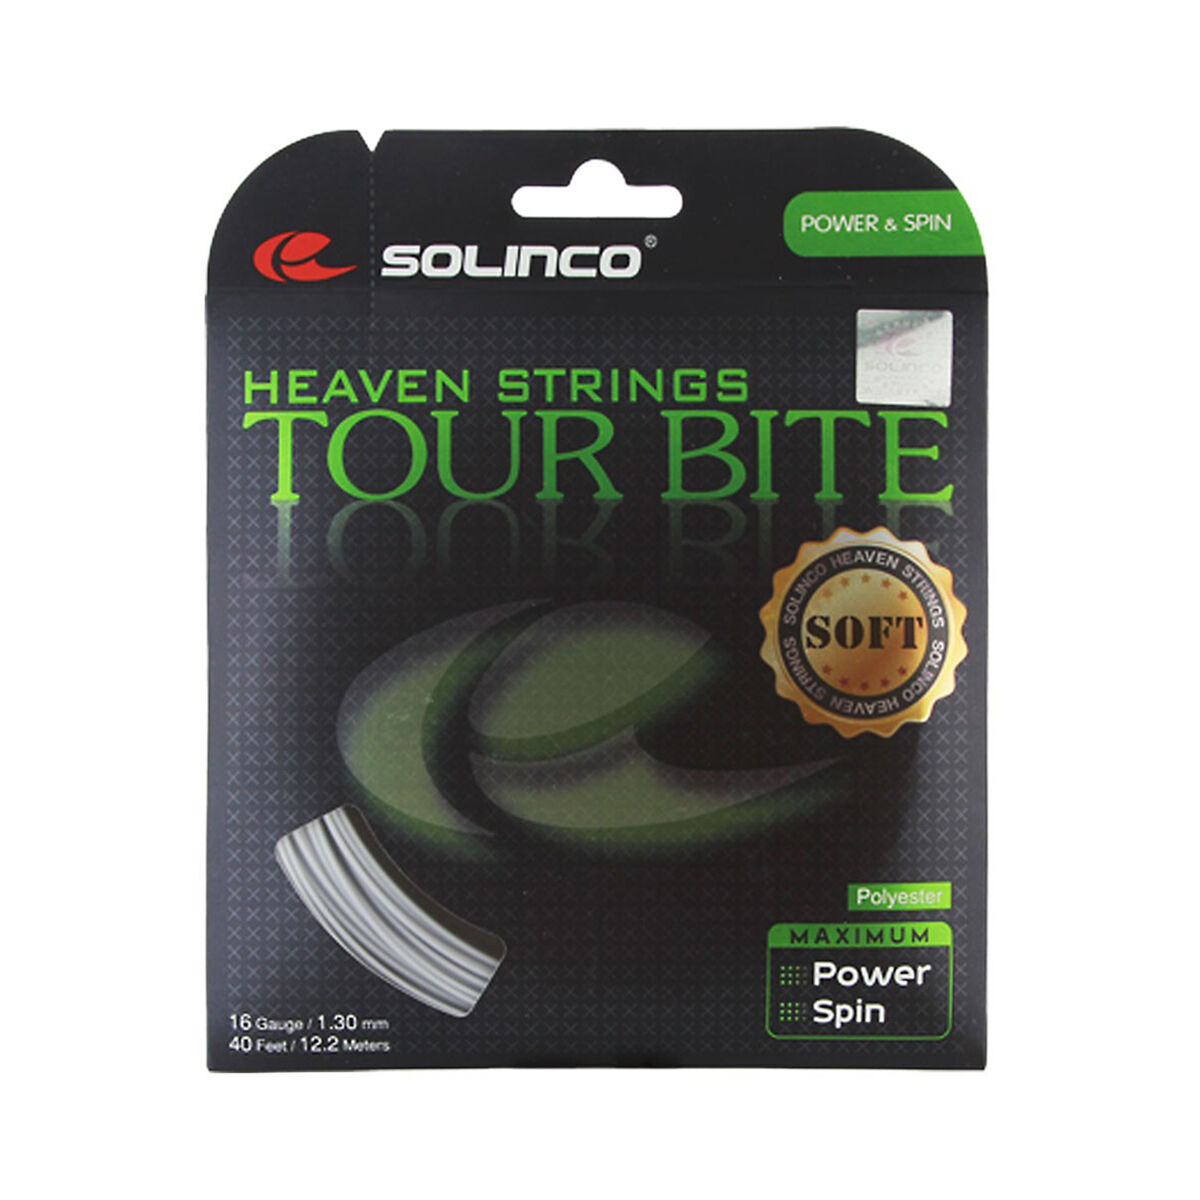 solinco tour bite recommended tension